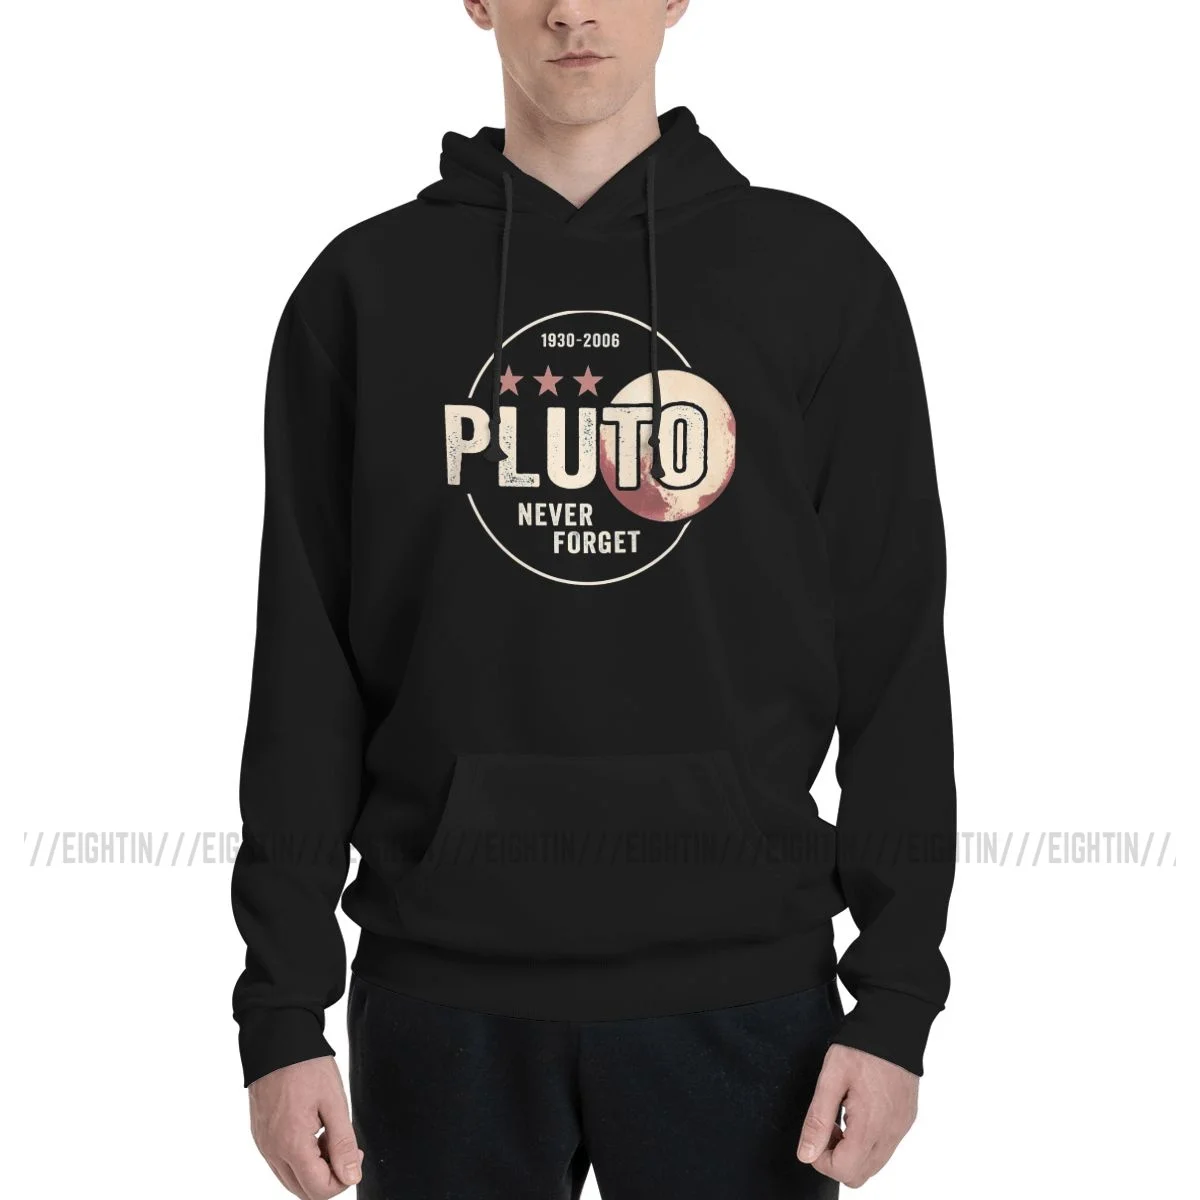 

Pluto Never Forget Hoodie Men's Fashion Retro Science Sweatshirts Autumn Long Sleeve Pullovers